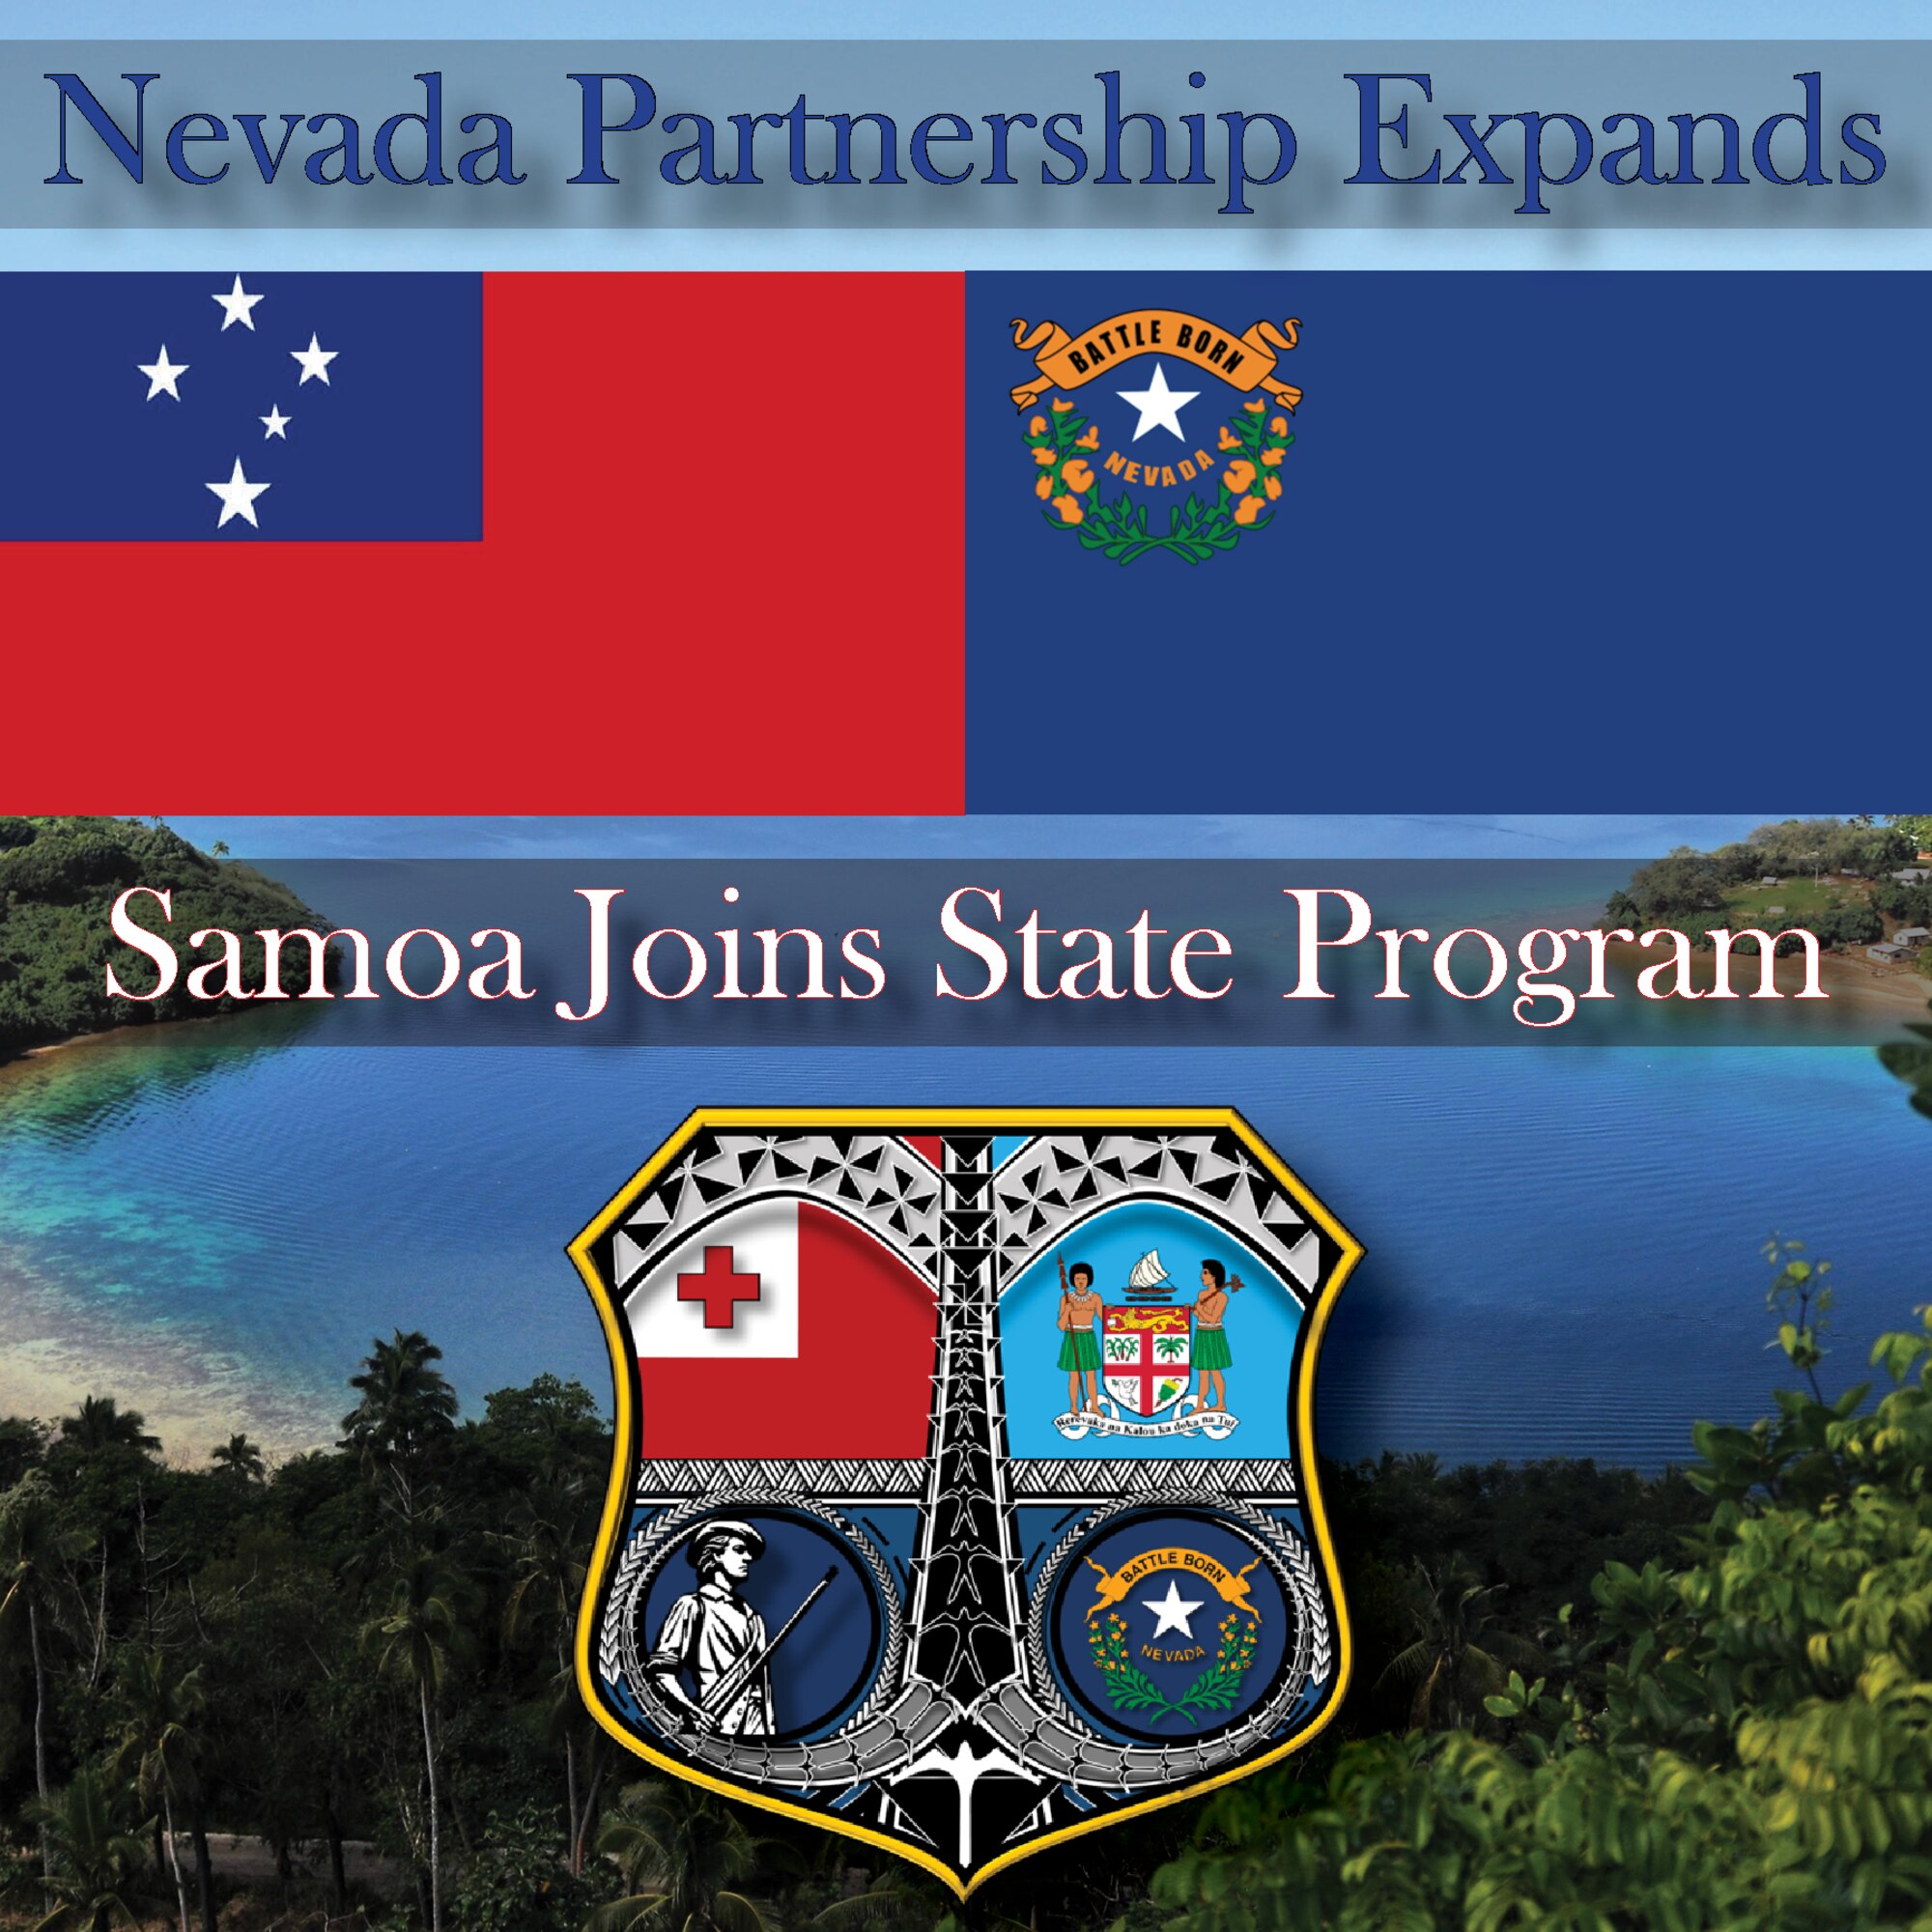 The Independent State of Samoa and the Nevada National Guard are new partners in the State Partnership Program. Graphic shows the Samoan and Nevada flags along with an emblem displaying the Tongan and Fijian flag of Nevada's other two SPP partners.